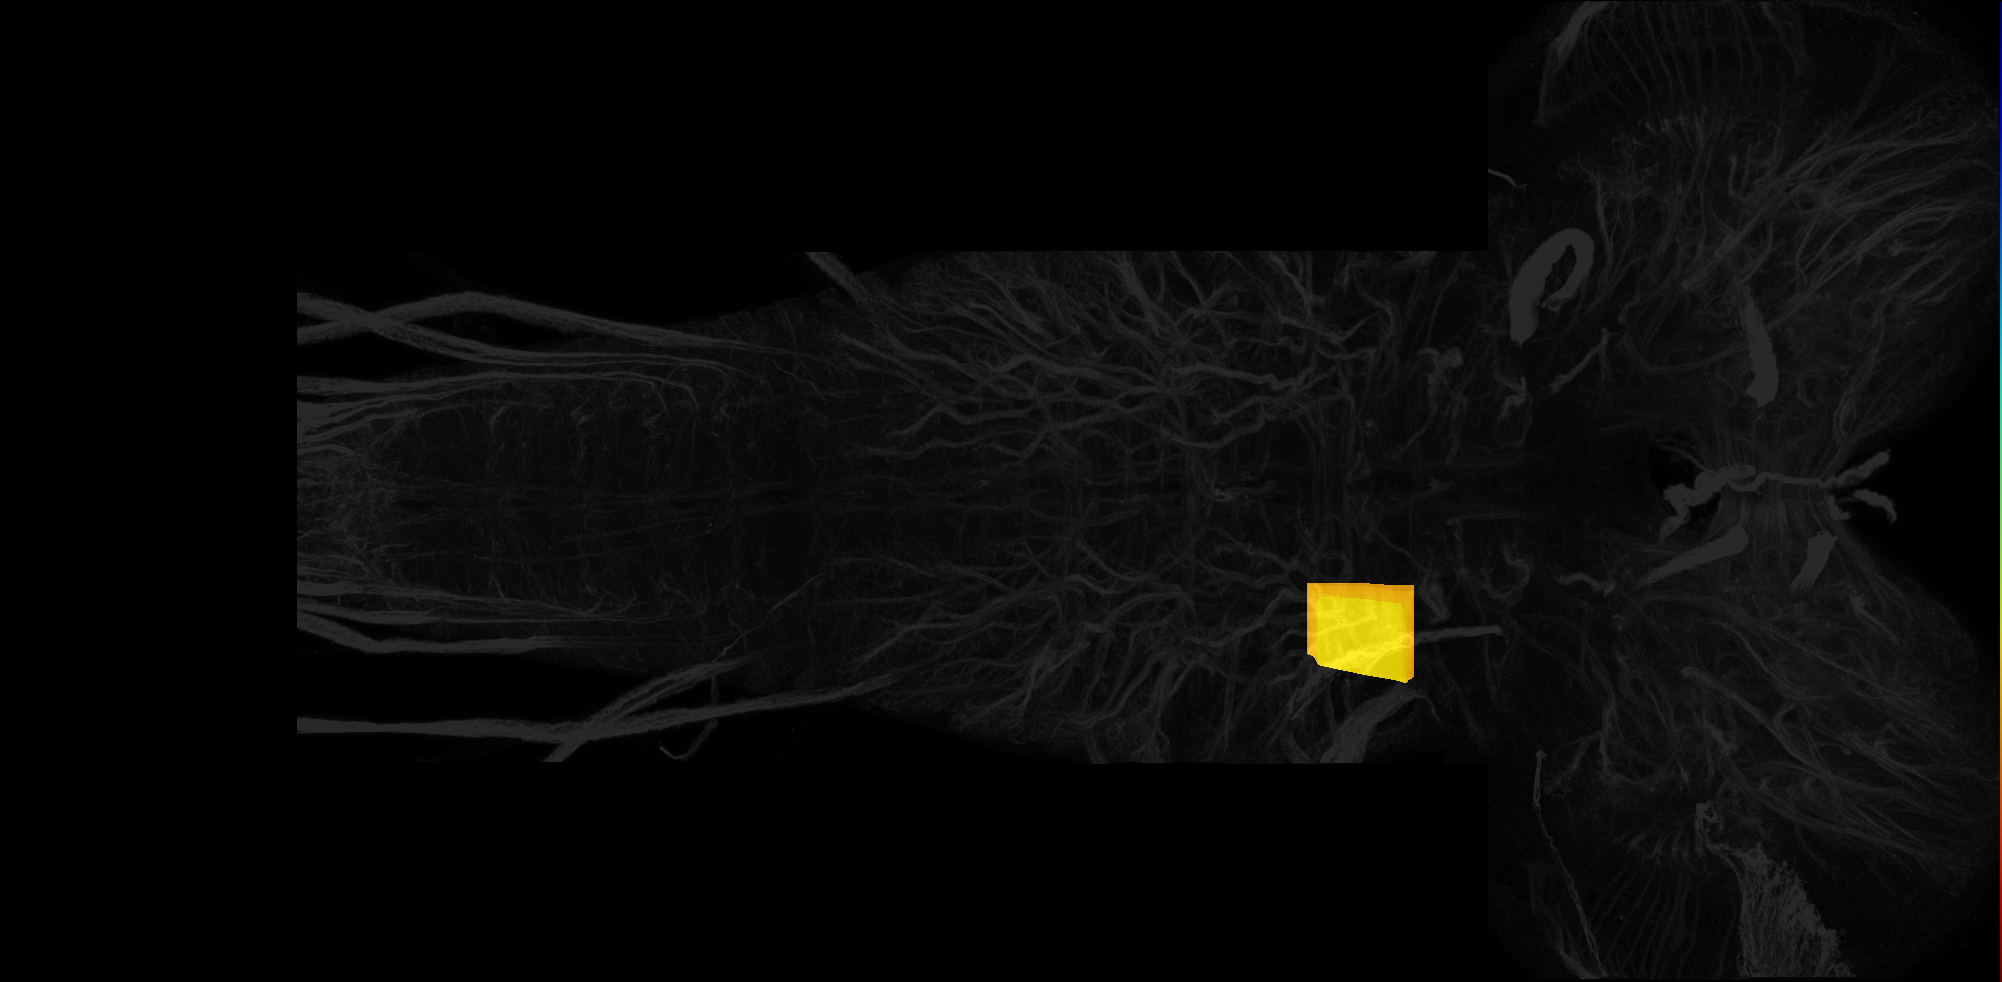 right centrolateral neuropil of T1 on L3 CNS template, Wood2018